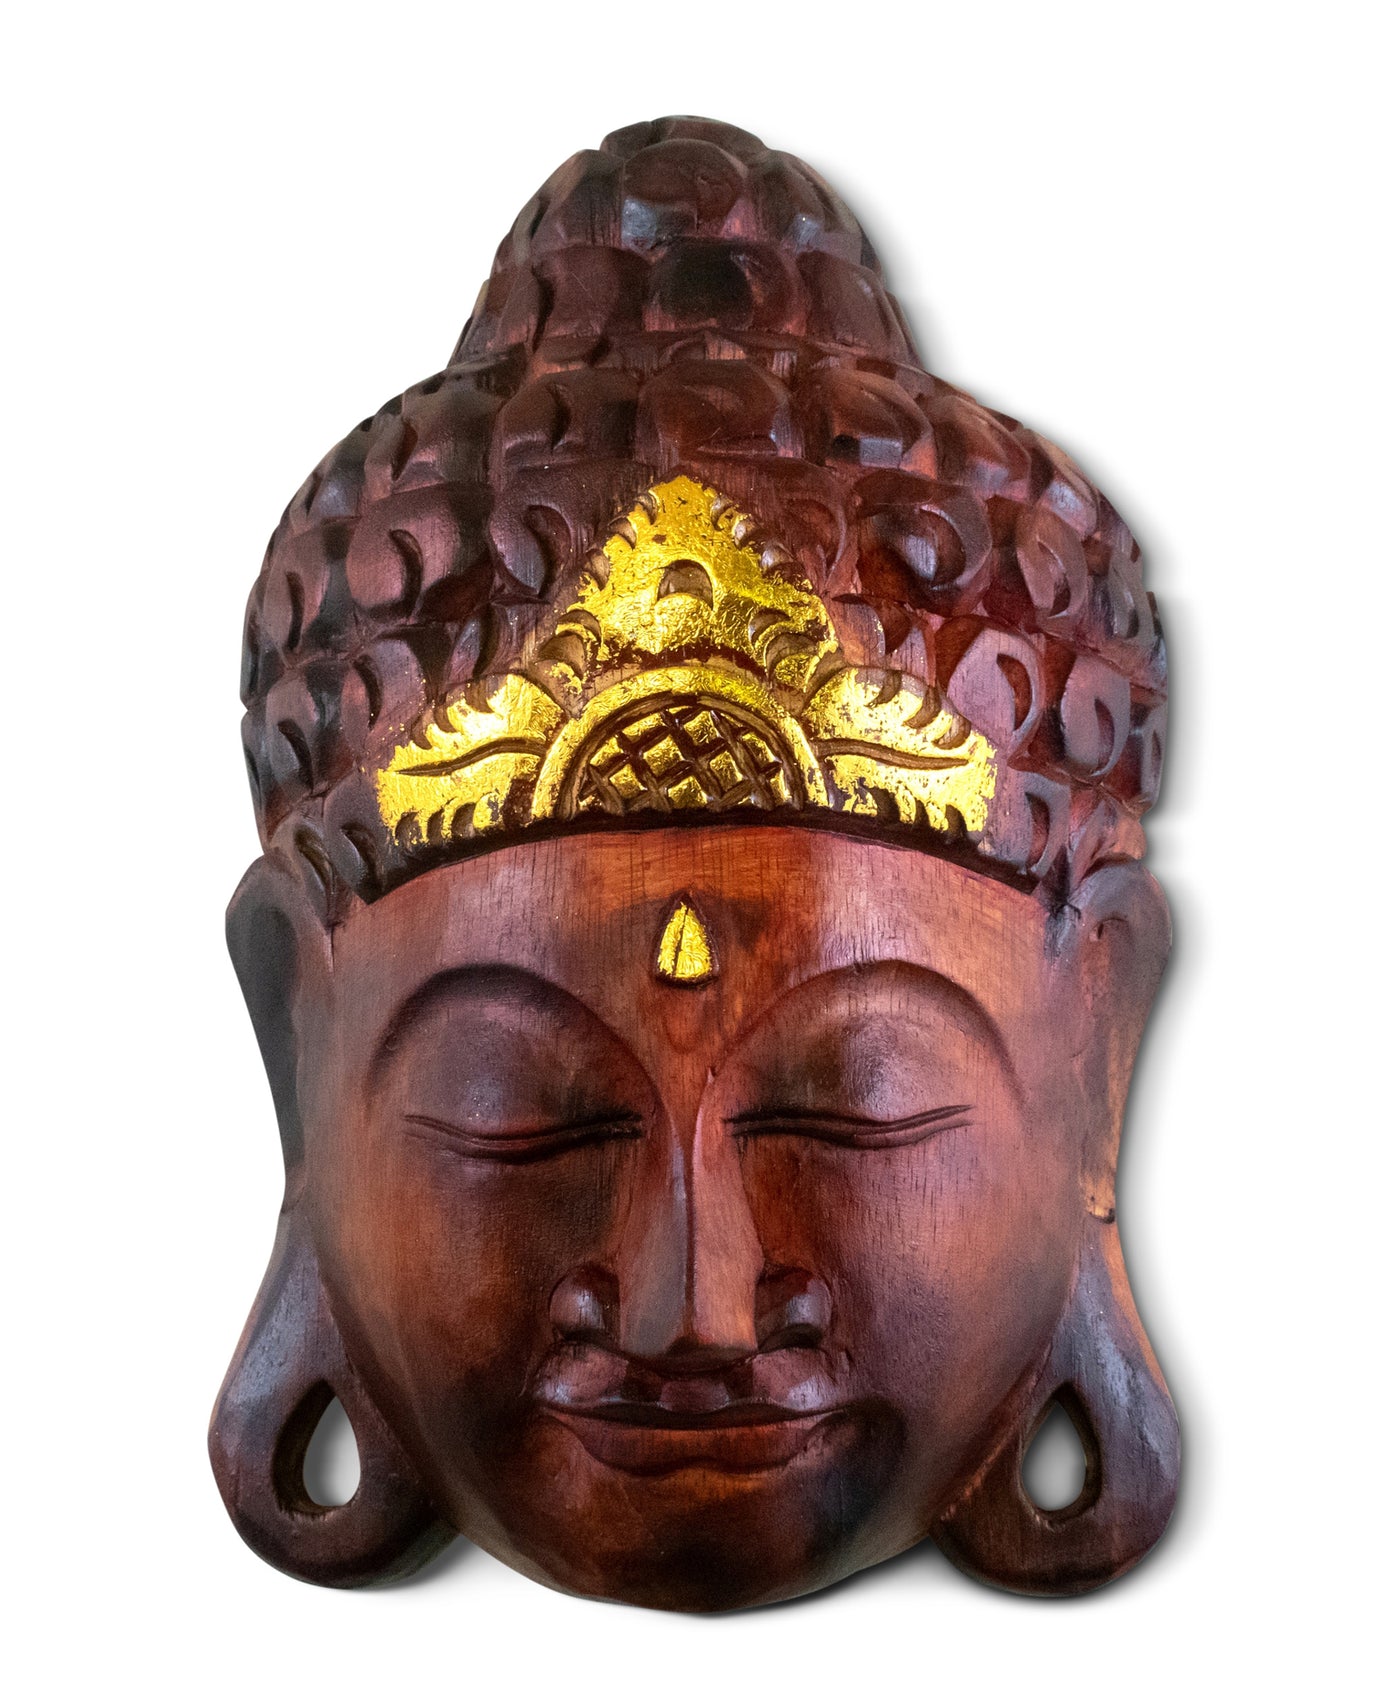 Wooden Wall Mask Serene Brown Buddha Head Statue Hand Carved Sculpture Handmade Figurine Gift Home Decor Accent Handcrafted Wall Hanging Decoration